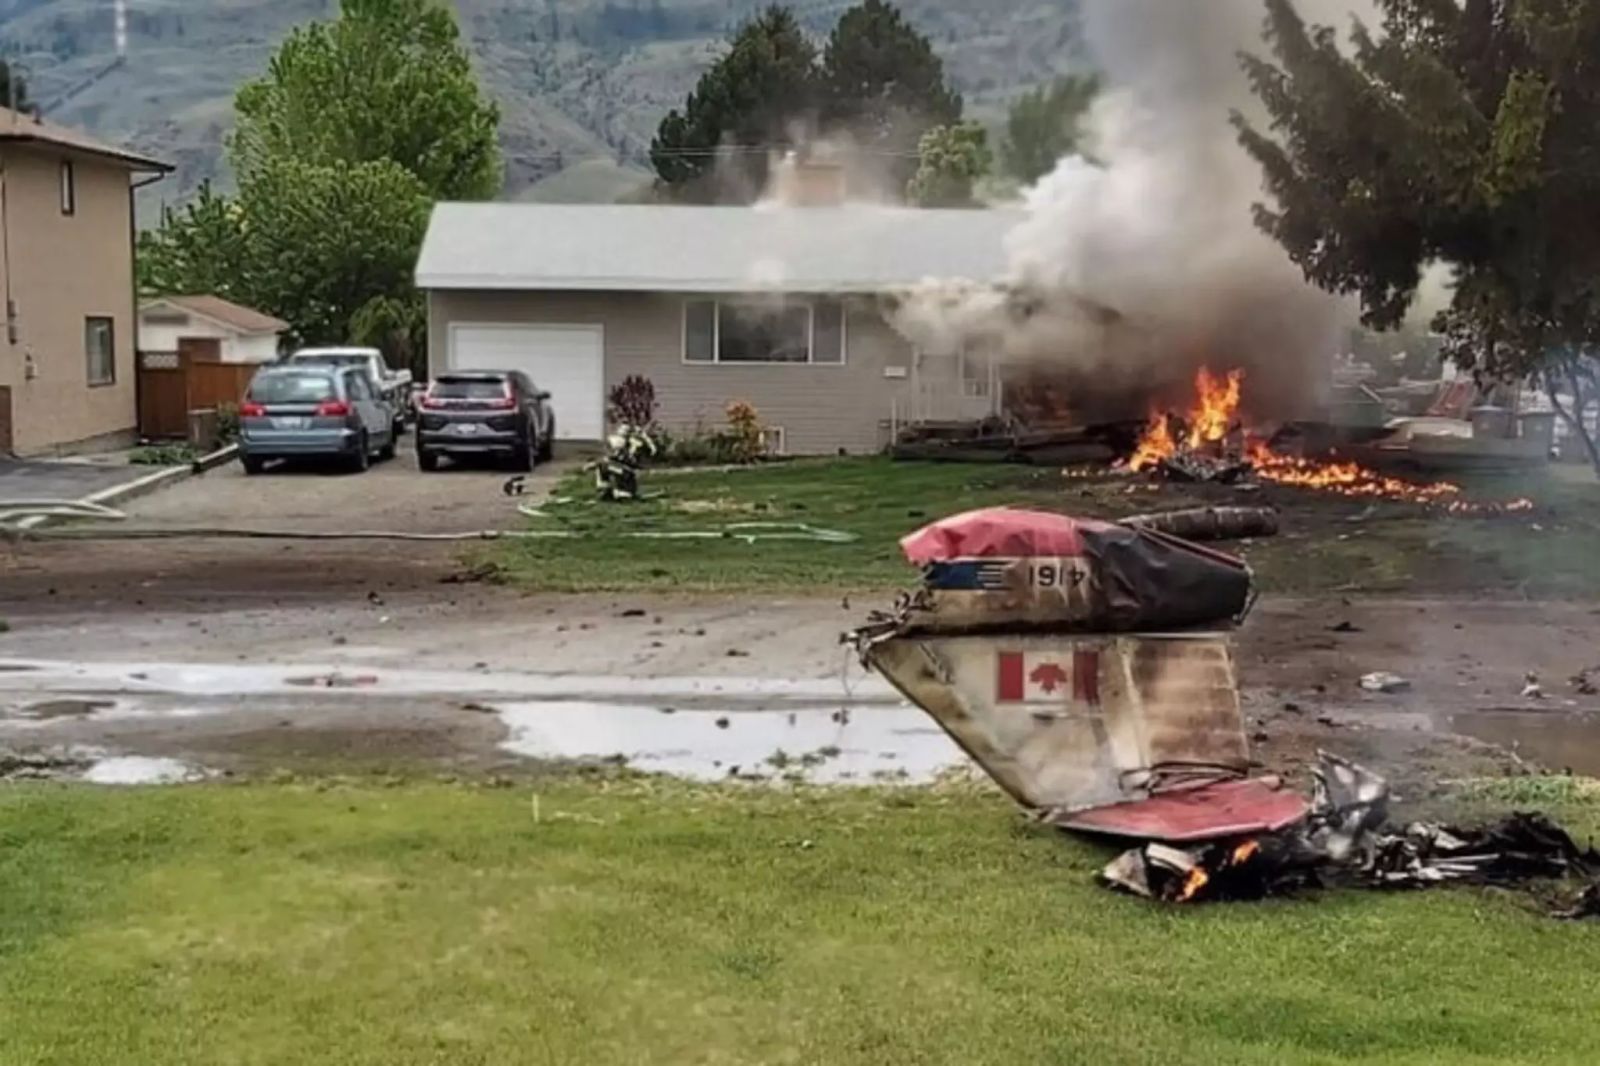 Illustration for article titled Snowbird Plane Crashes into House in Kamloops - Update: One Fatality Confirmed